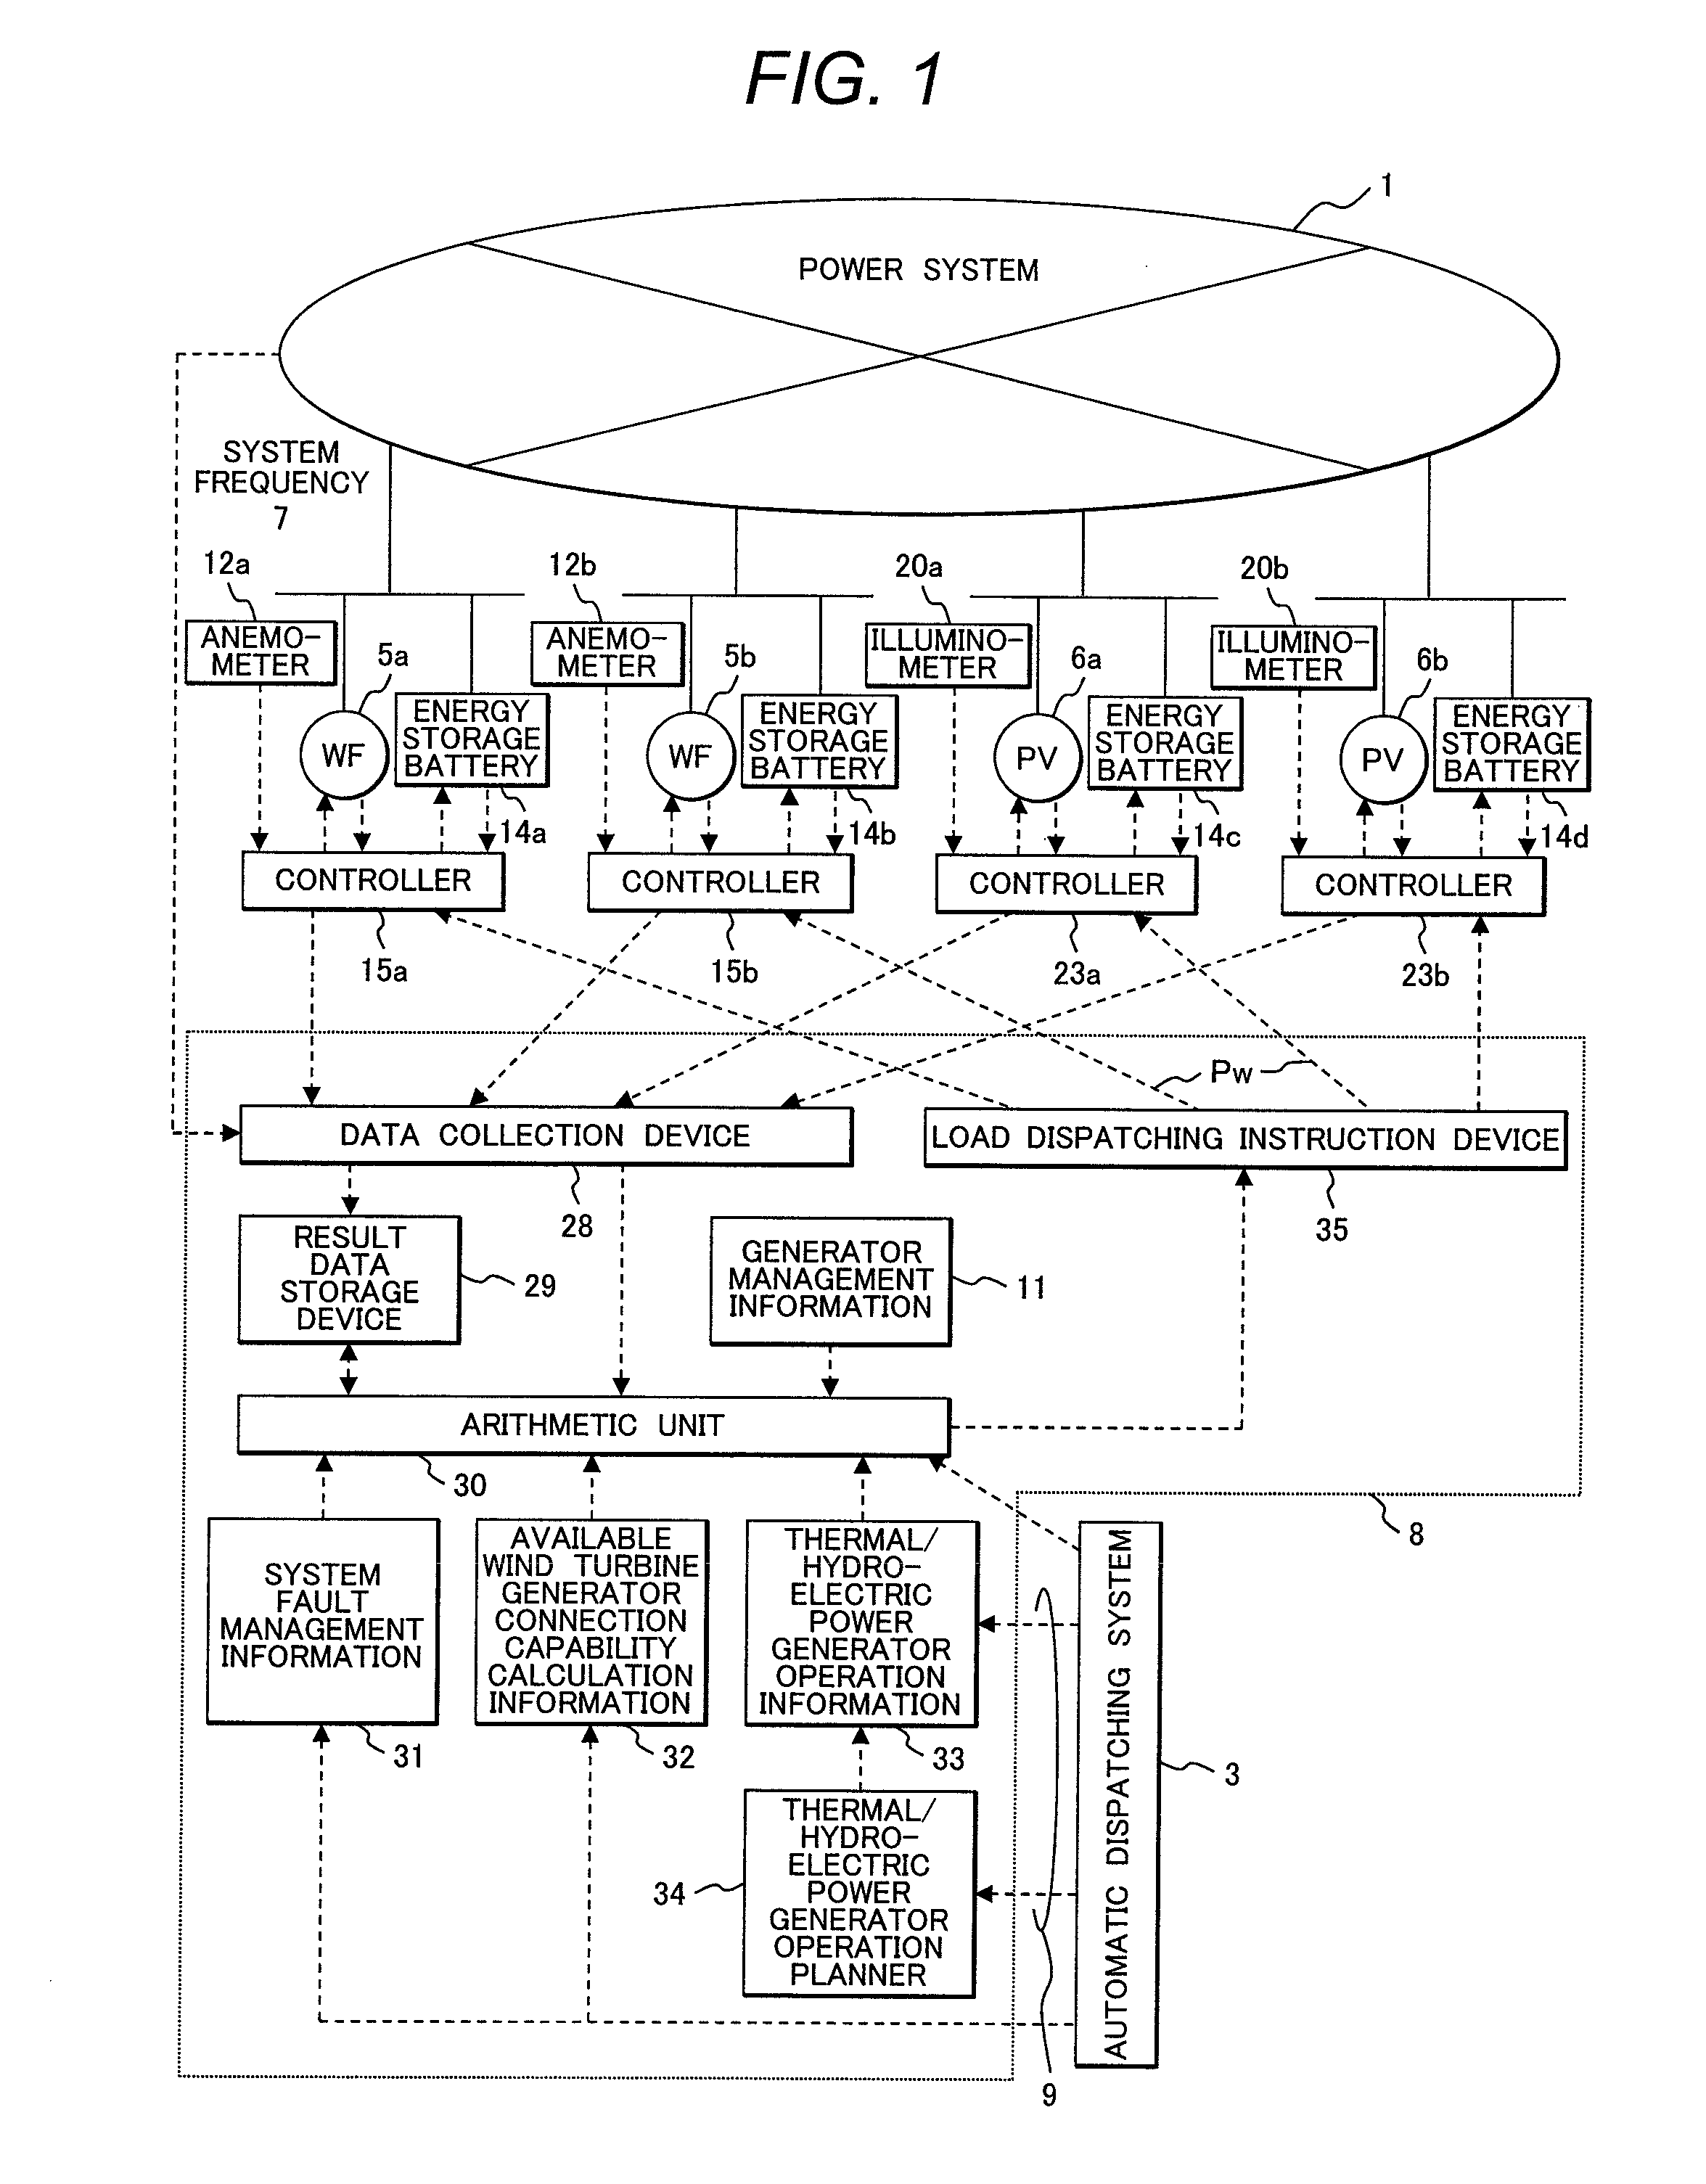 Power grid operation control system, device, and method